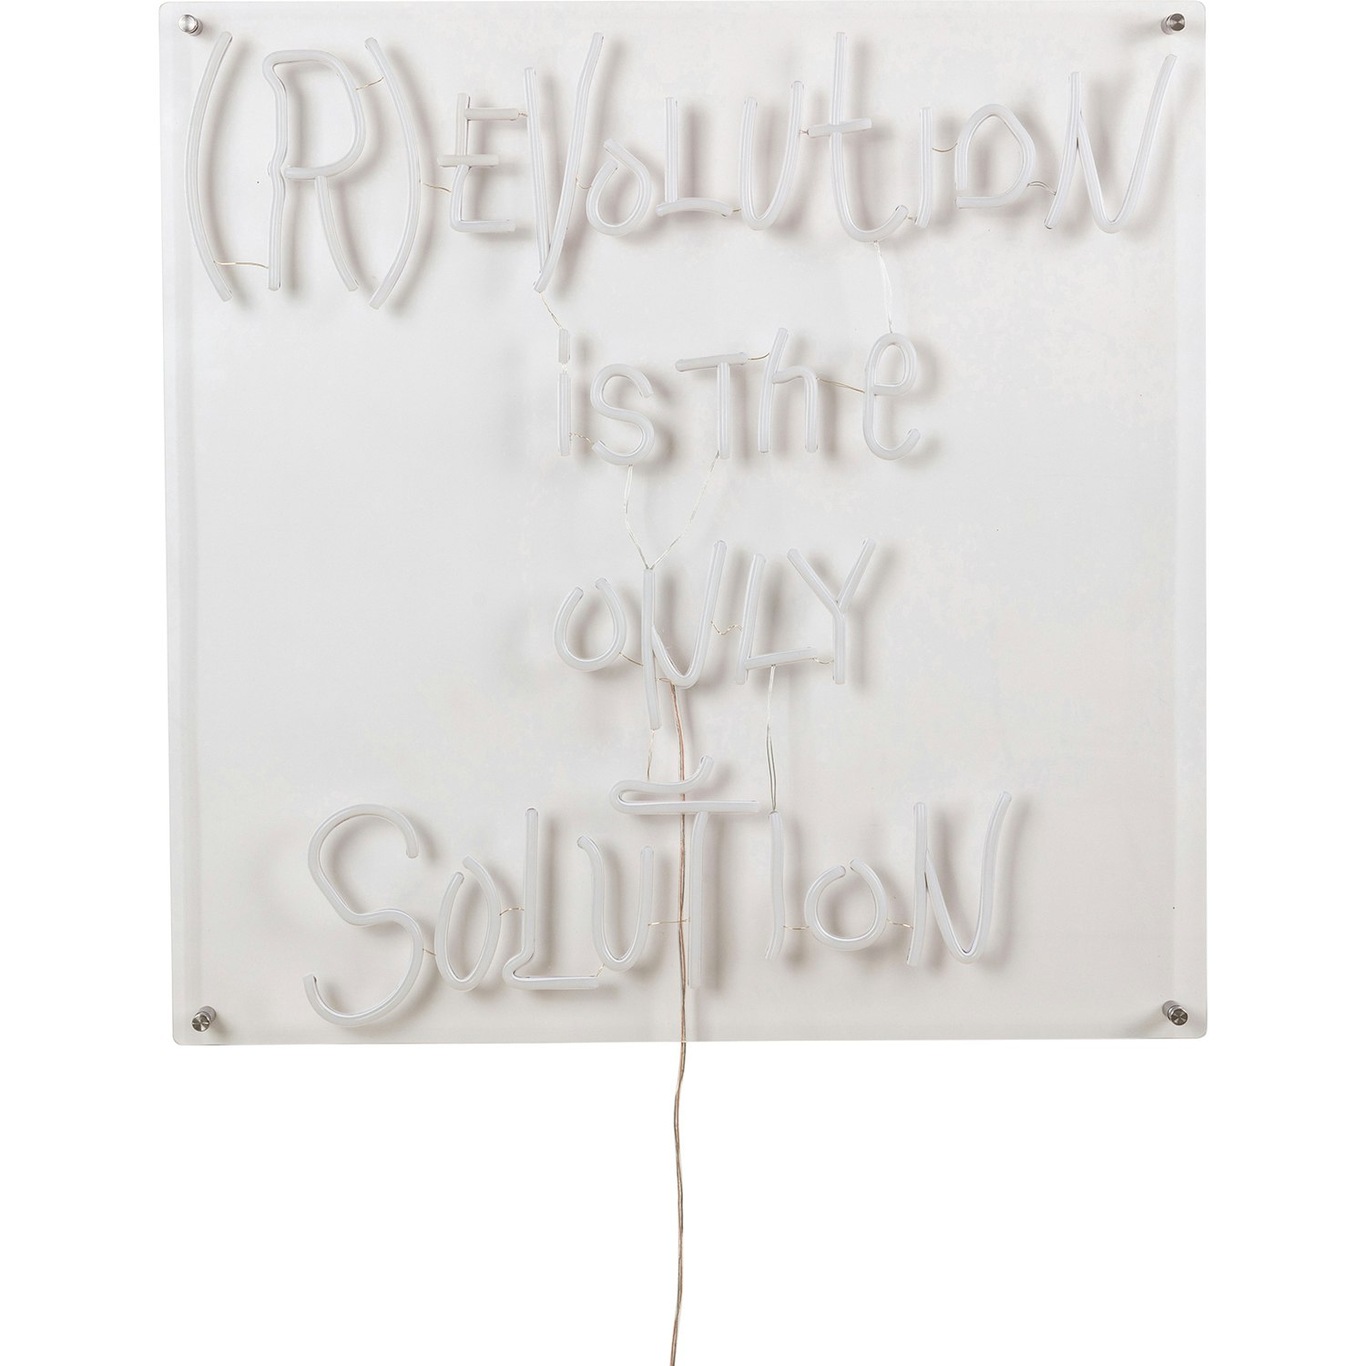 (R)evolution Is The Only Solution Wandlamp